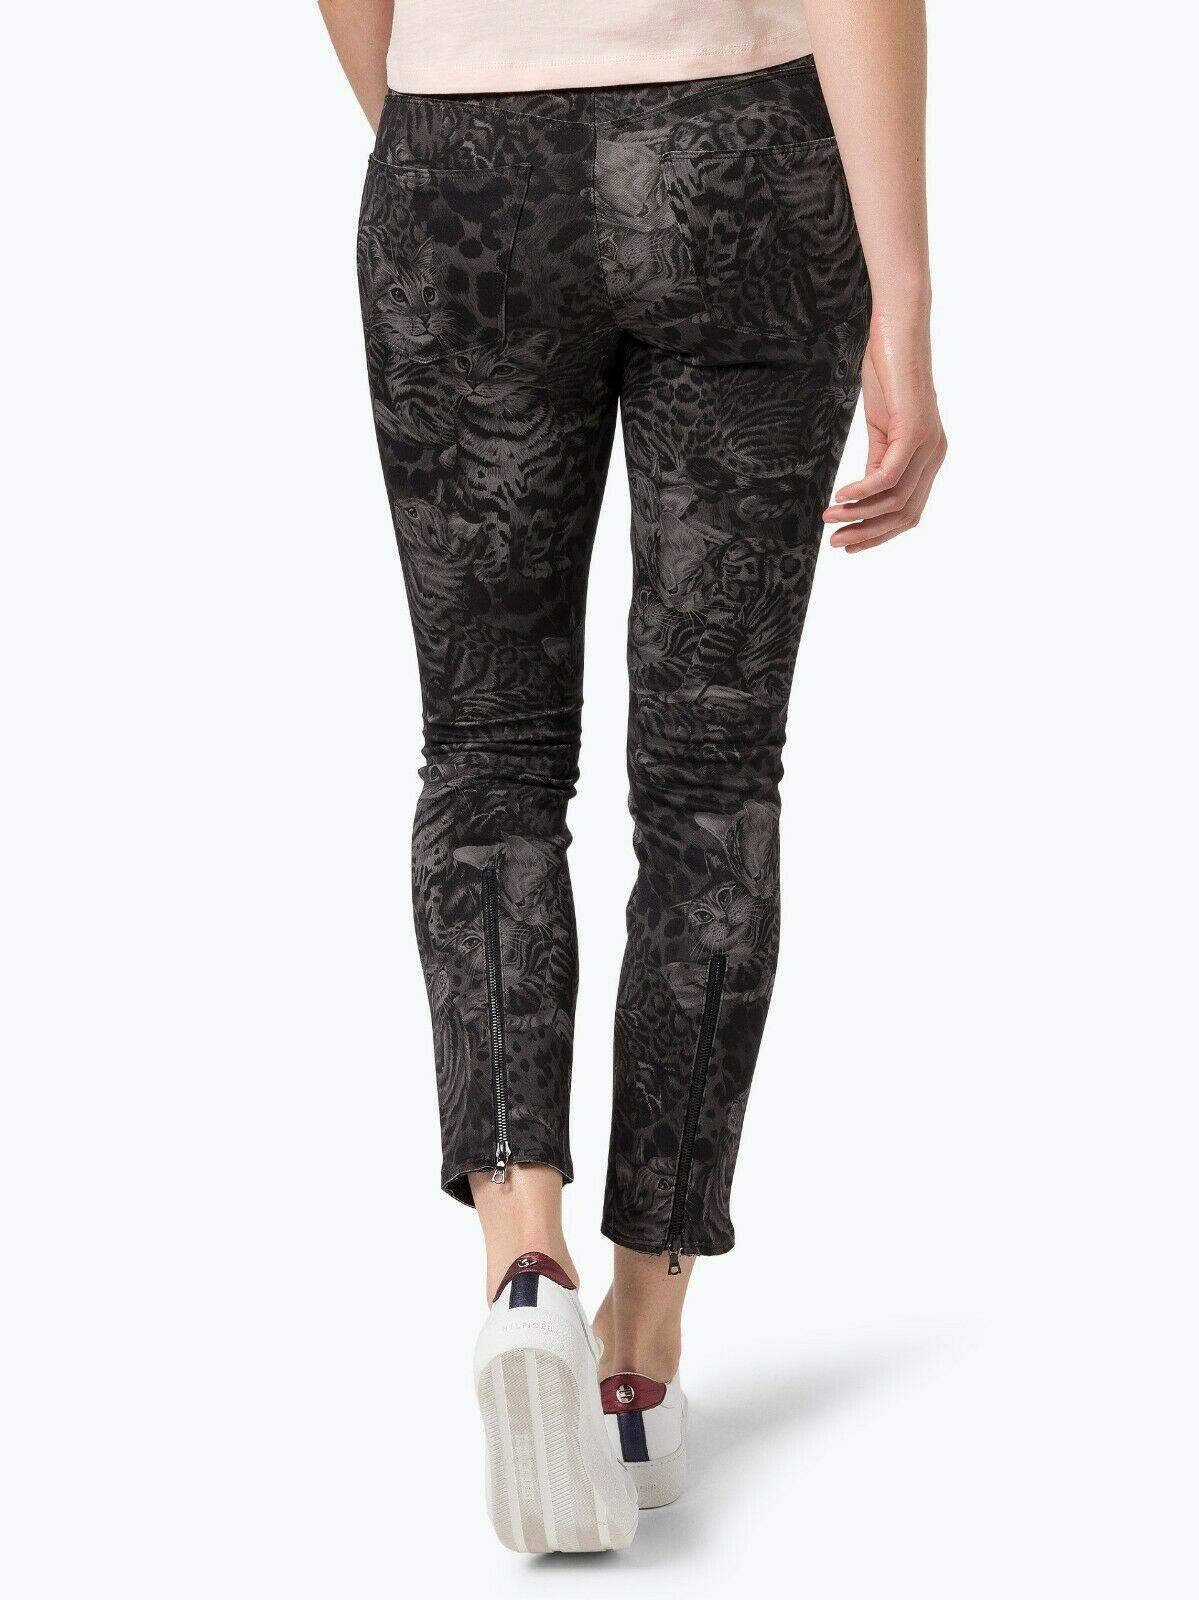 Women's Cambio Lilibeth Pants Legging With Animal Cats Print  Size US 4  EUR 34 - SVNYFancy